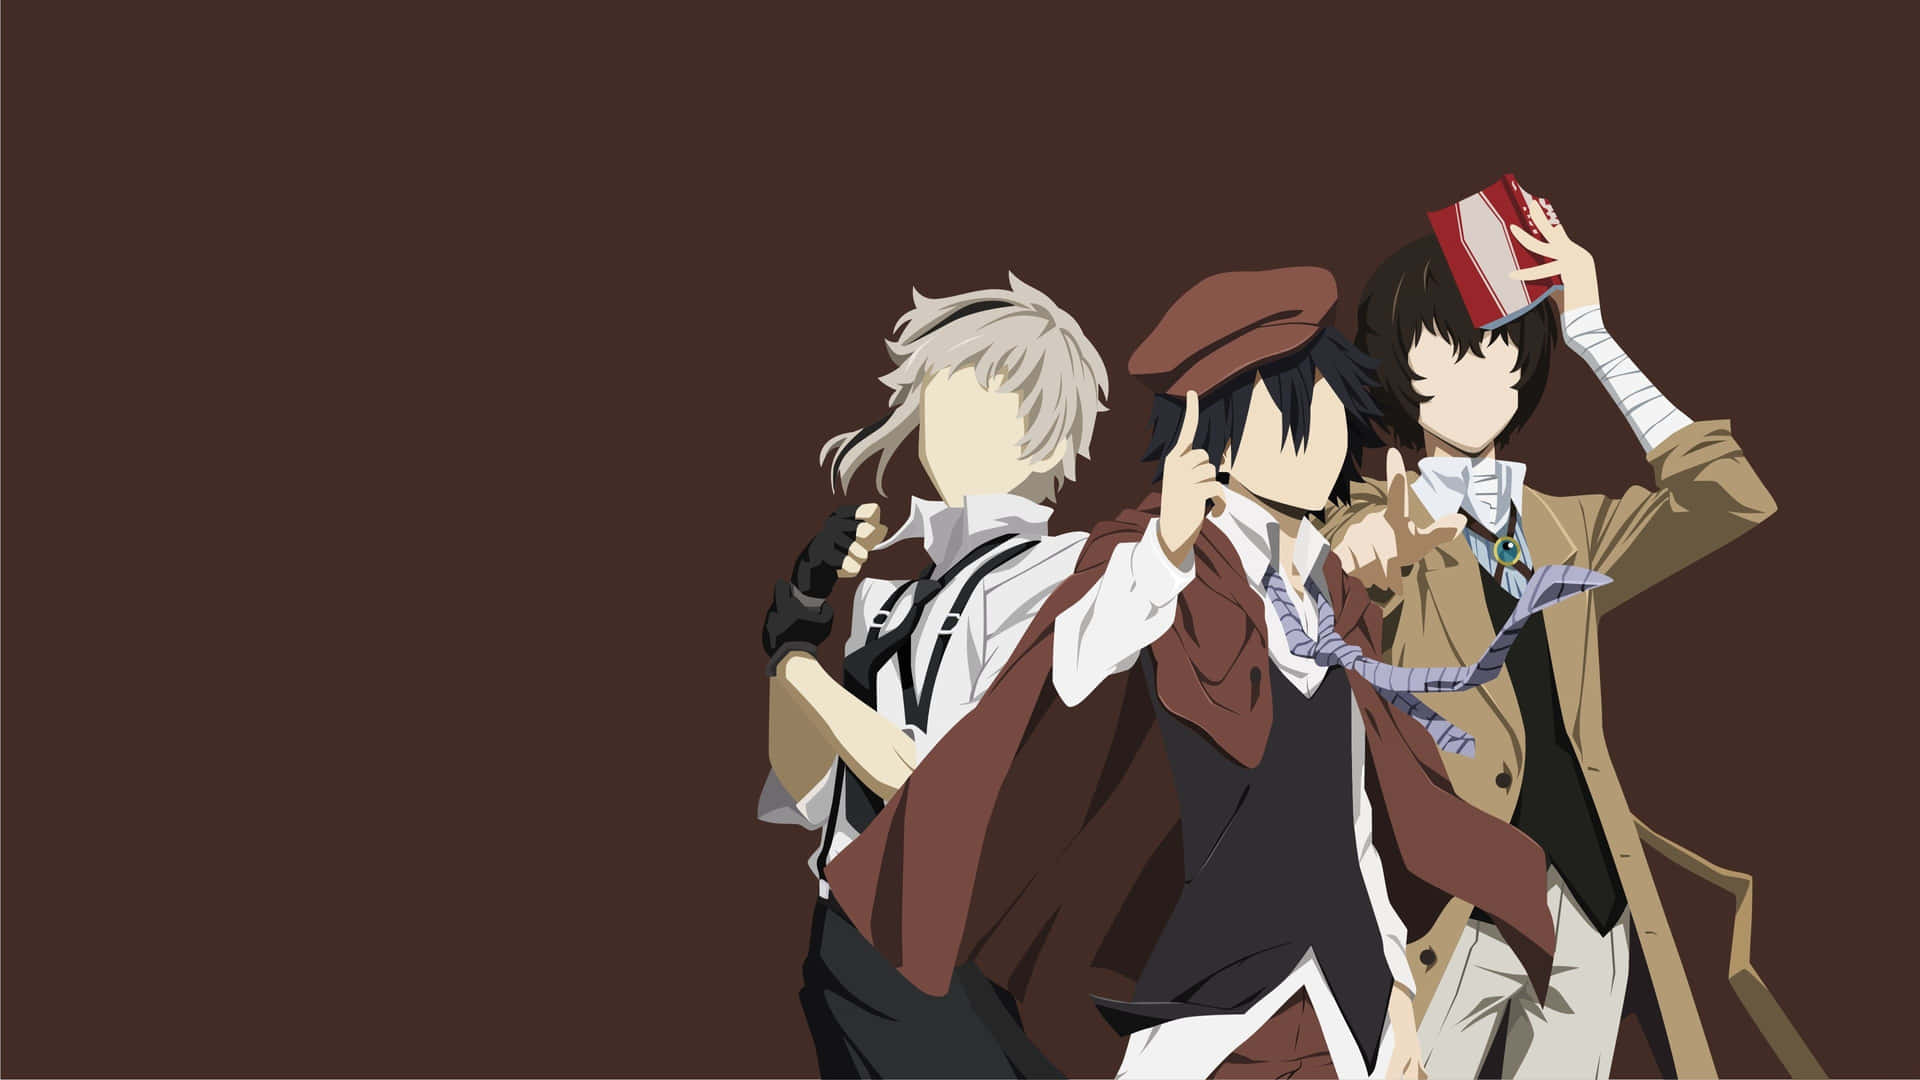 "Explore the world of Bungou Stray Dogs with these brave protagonists" Wallpaper